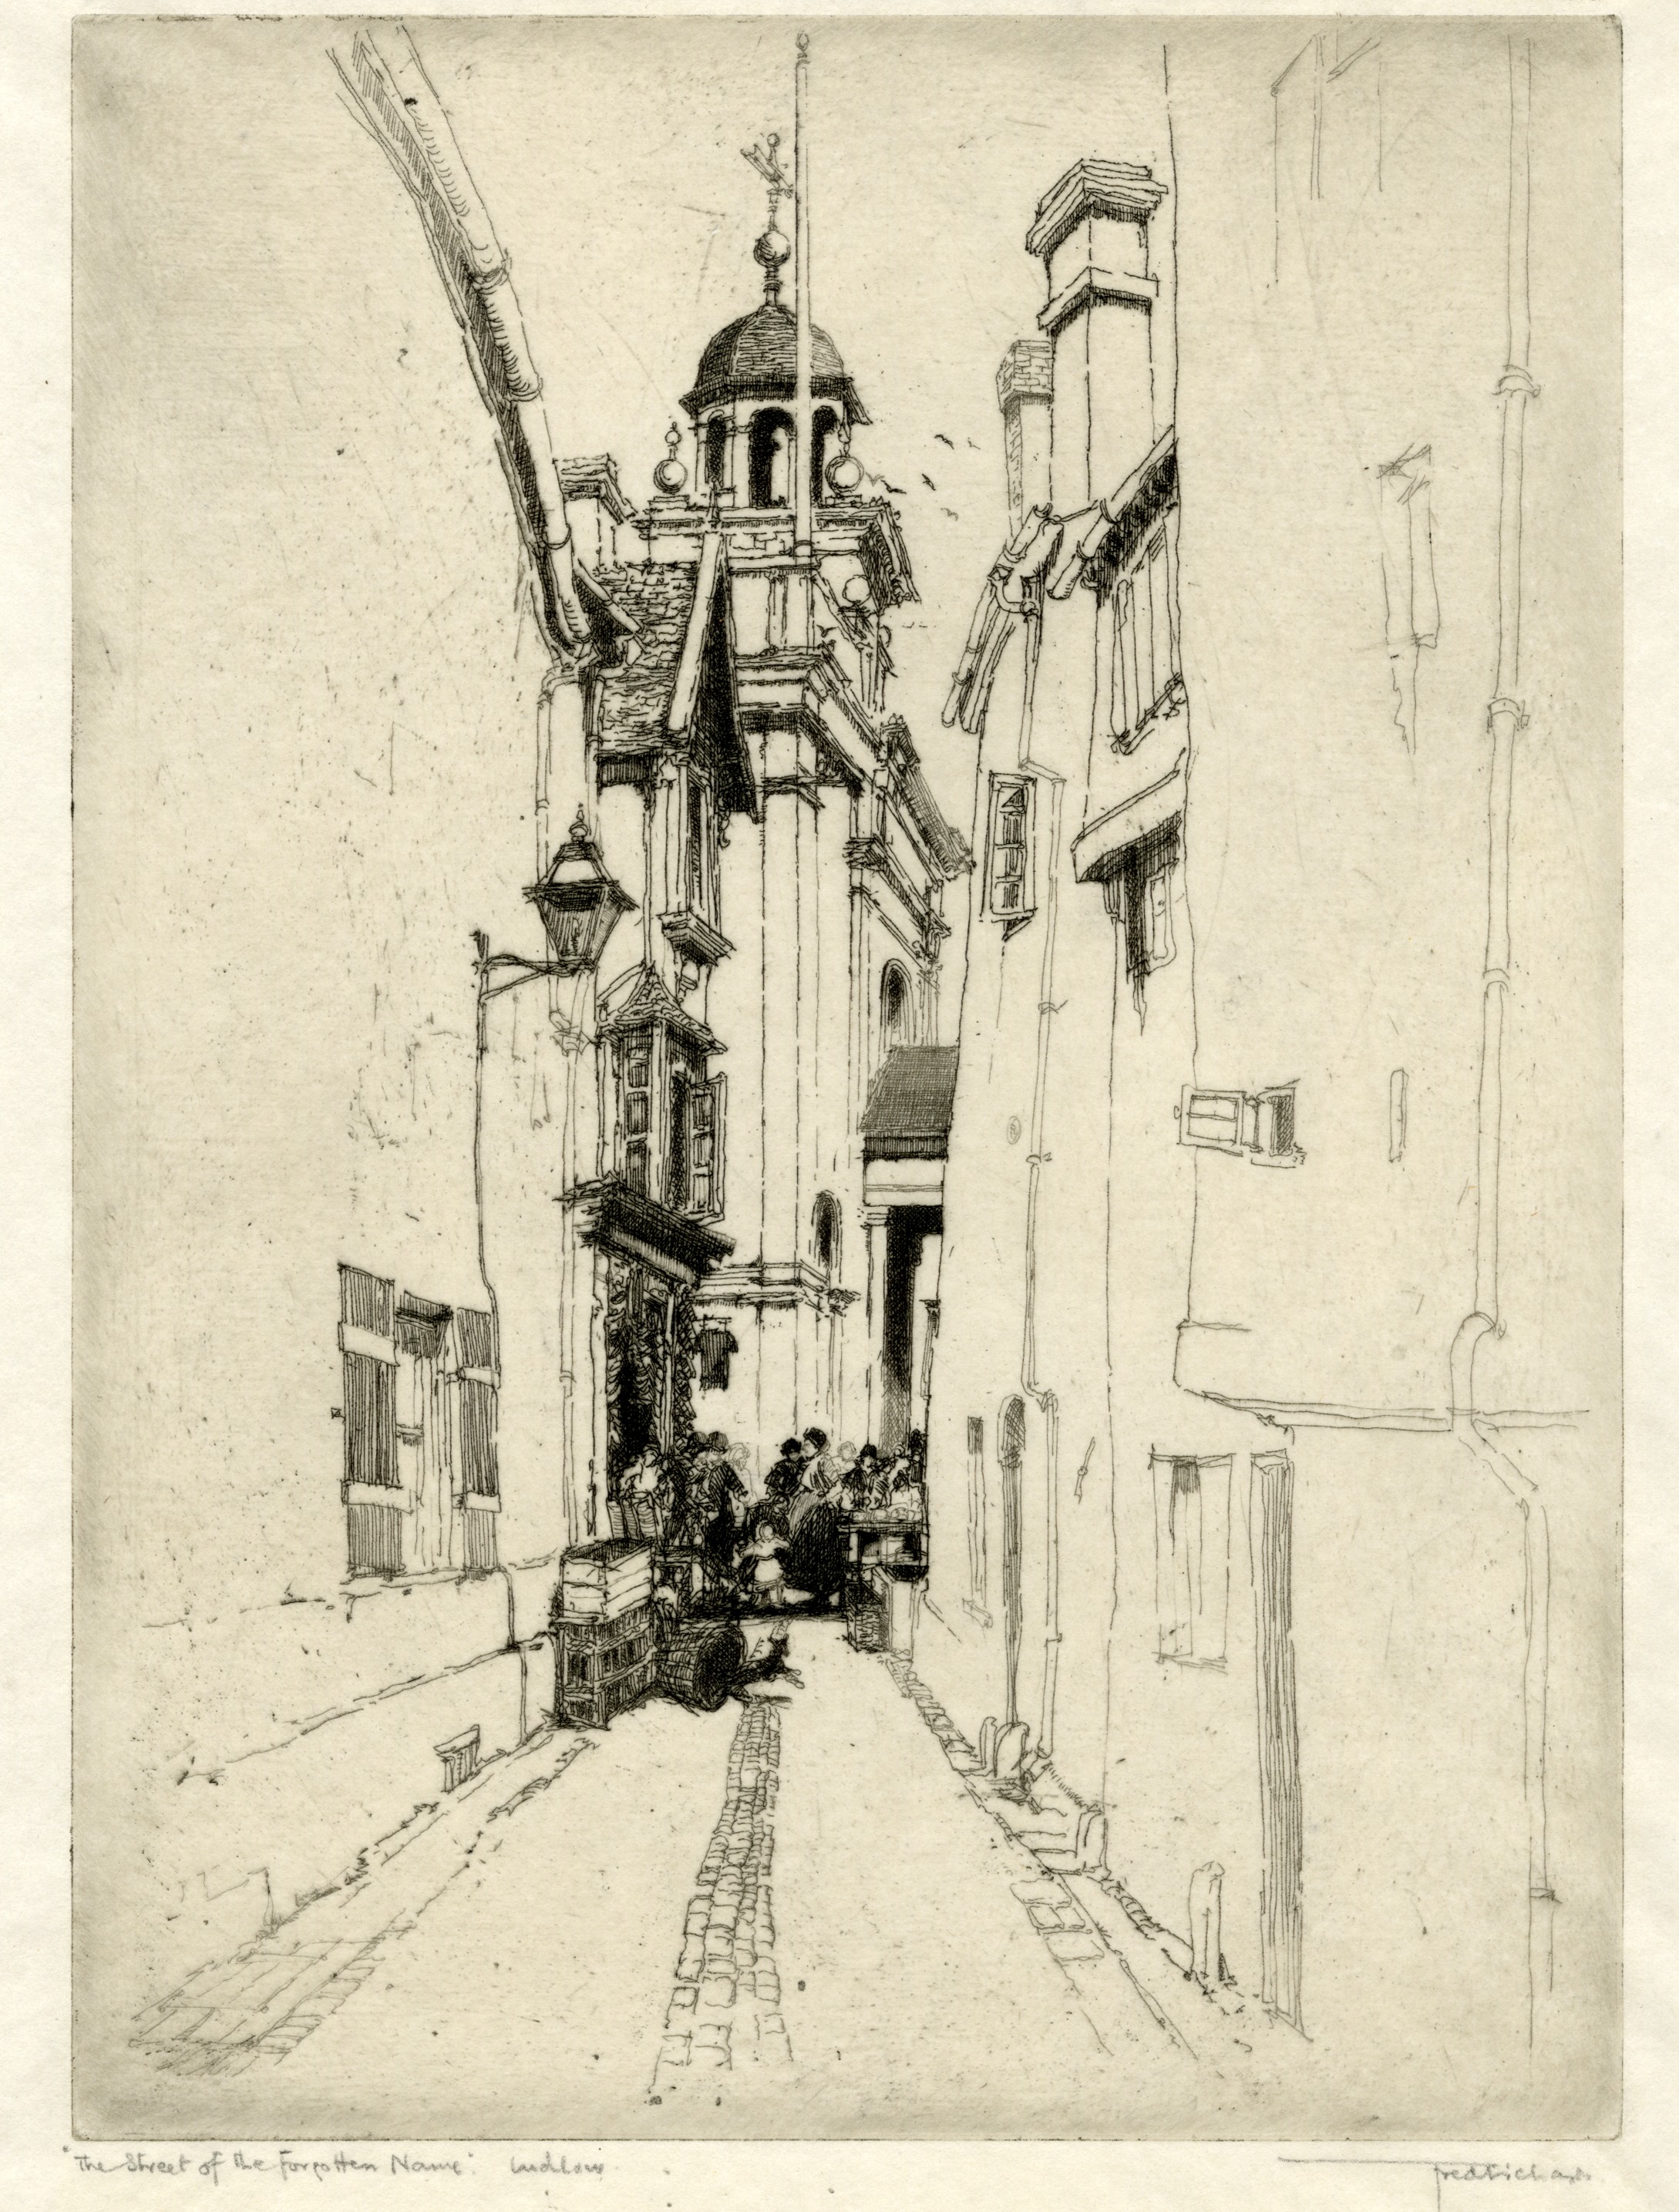 The street of the forgotten name, Ludlow (1925)